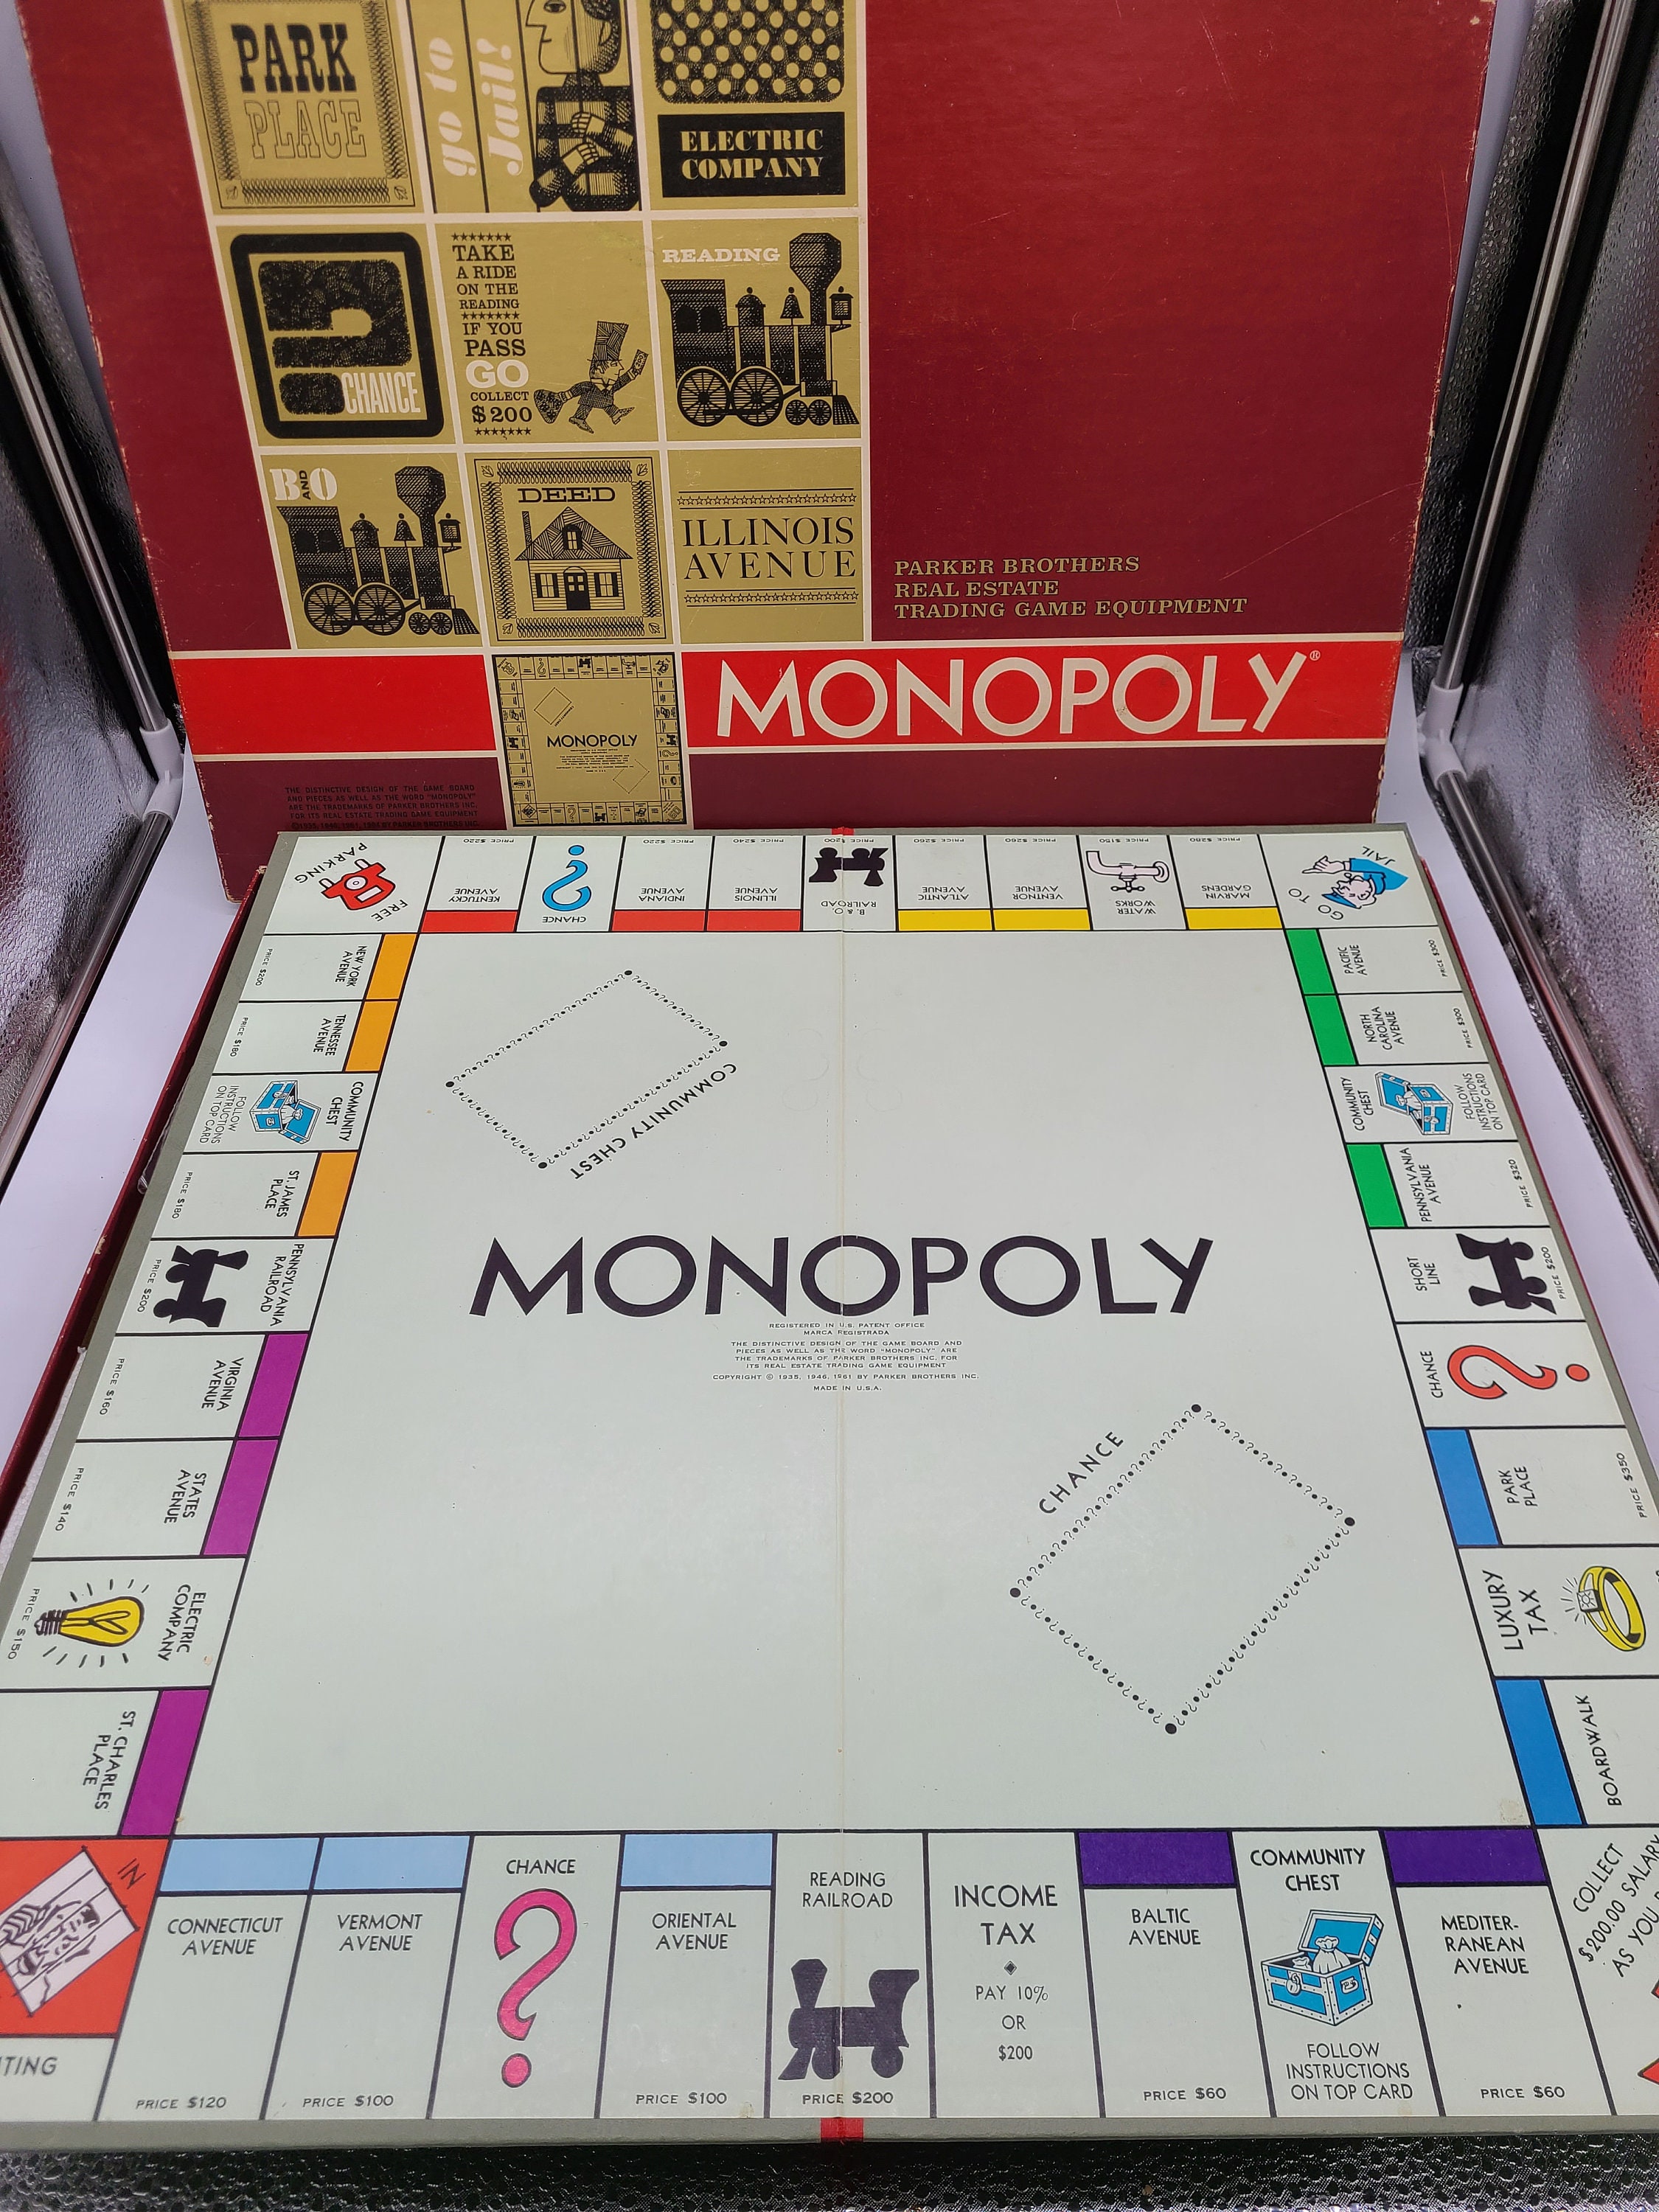 Vintage 1964 Monopoly Game by Parker Brothers Red Oversize -  Portugal